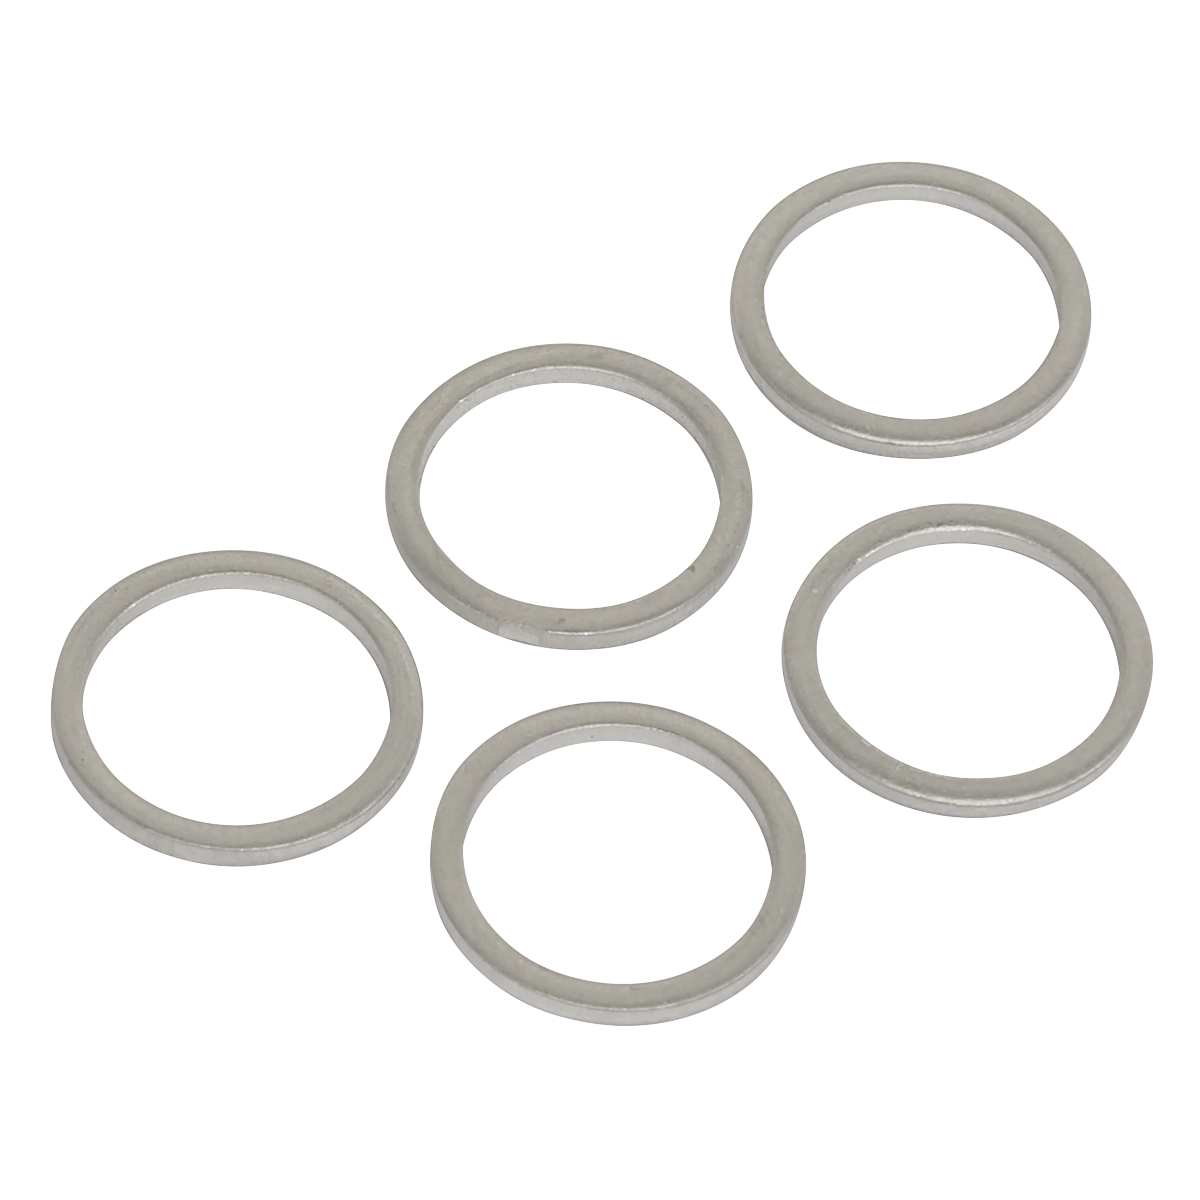 Sealey VS15SPW Sump Plug Washer M15 - Pack of 5 from Lawson HIS